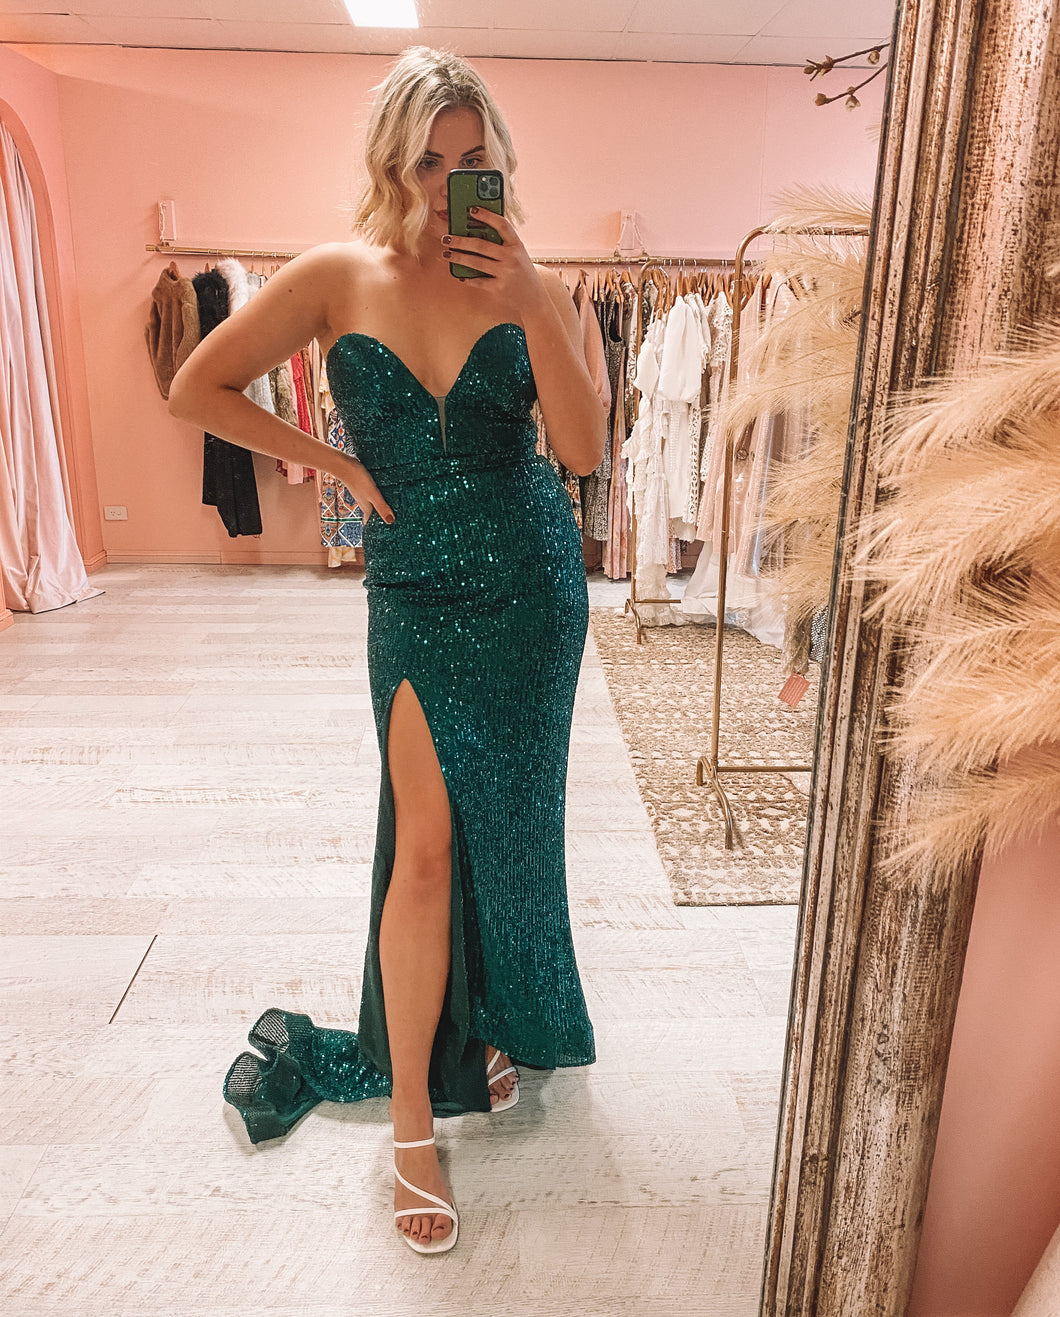 Tina Holly - Emerald Green Strapless Sequin Gown (Size 10/12)